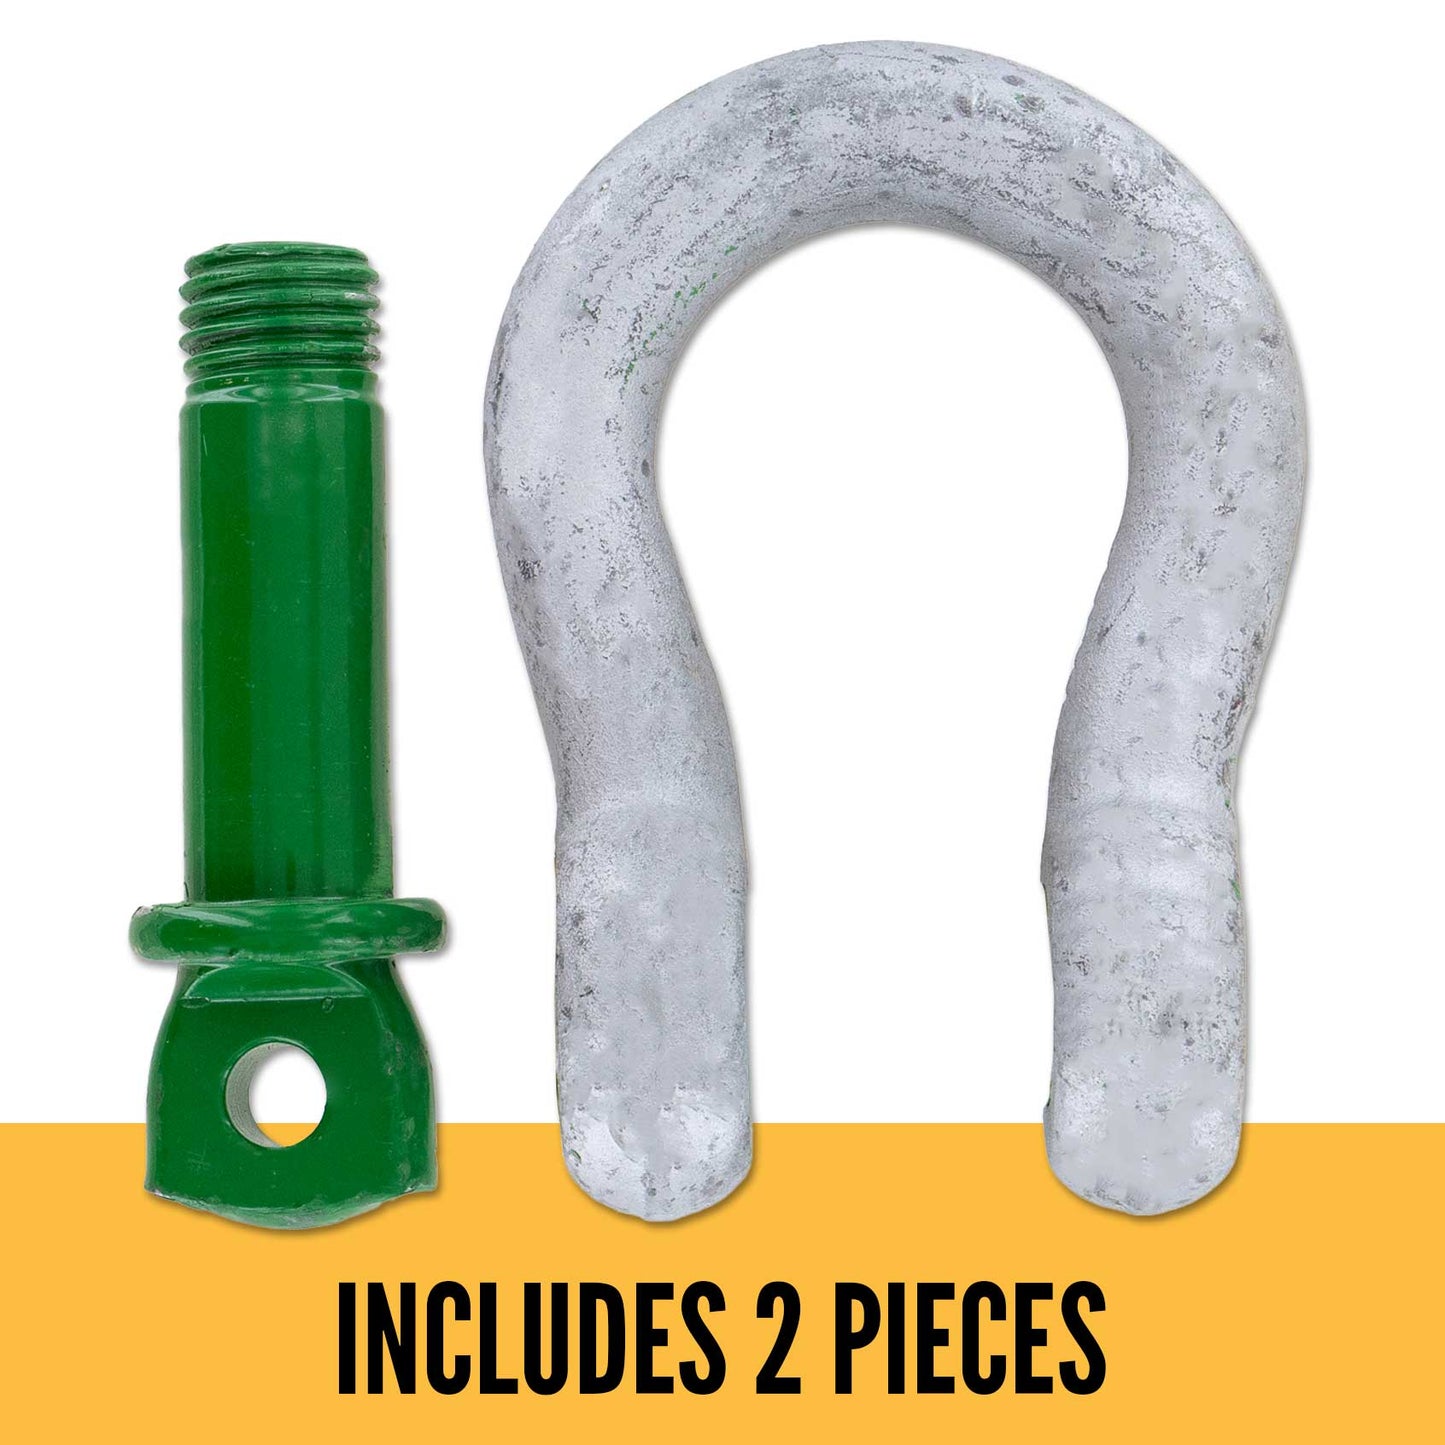 1/4" Van Beest Green Pin® Screw Pin Anchor Shackle | G-4161 - 0.5 Ton parts of a shackle